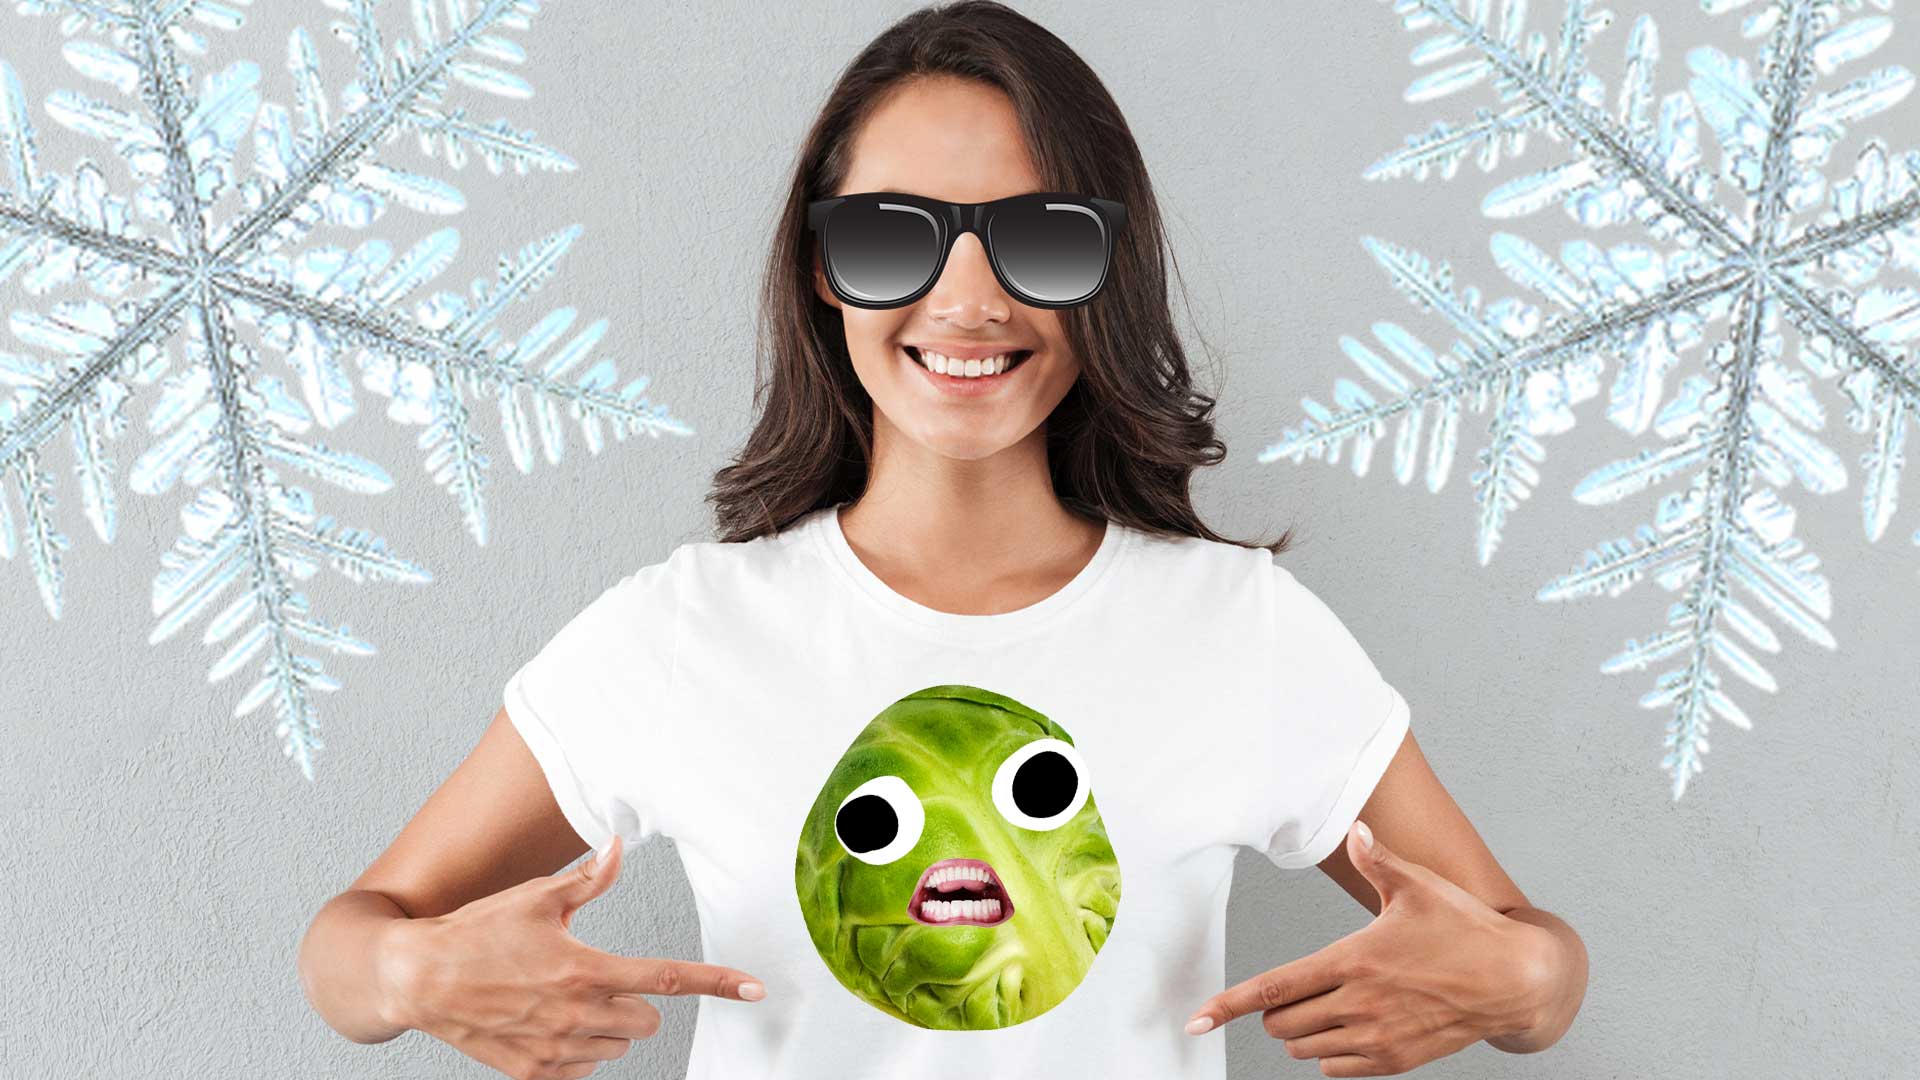 A woman wearing a Brussels sprout t-shirt